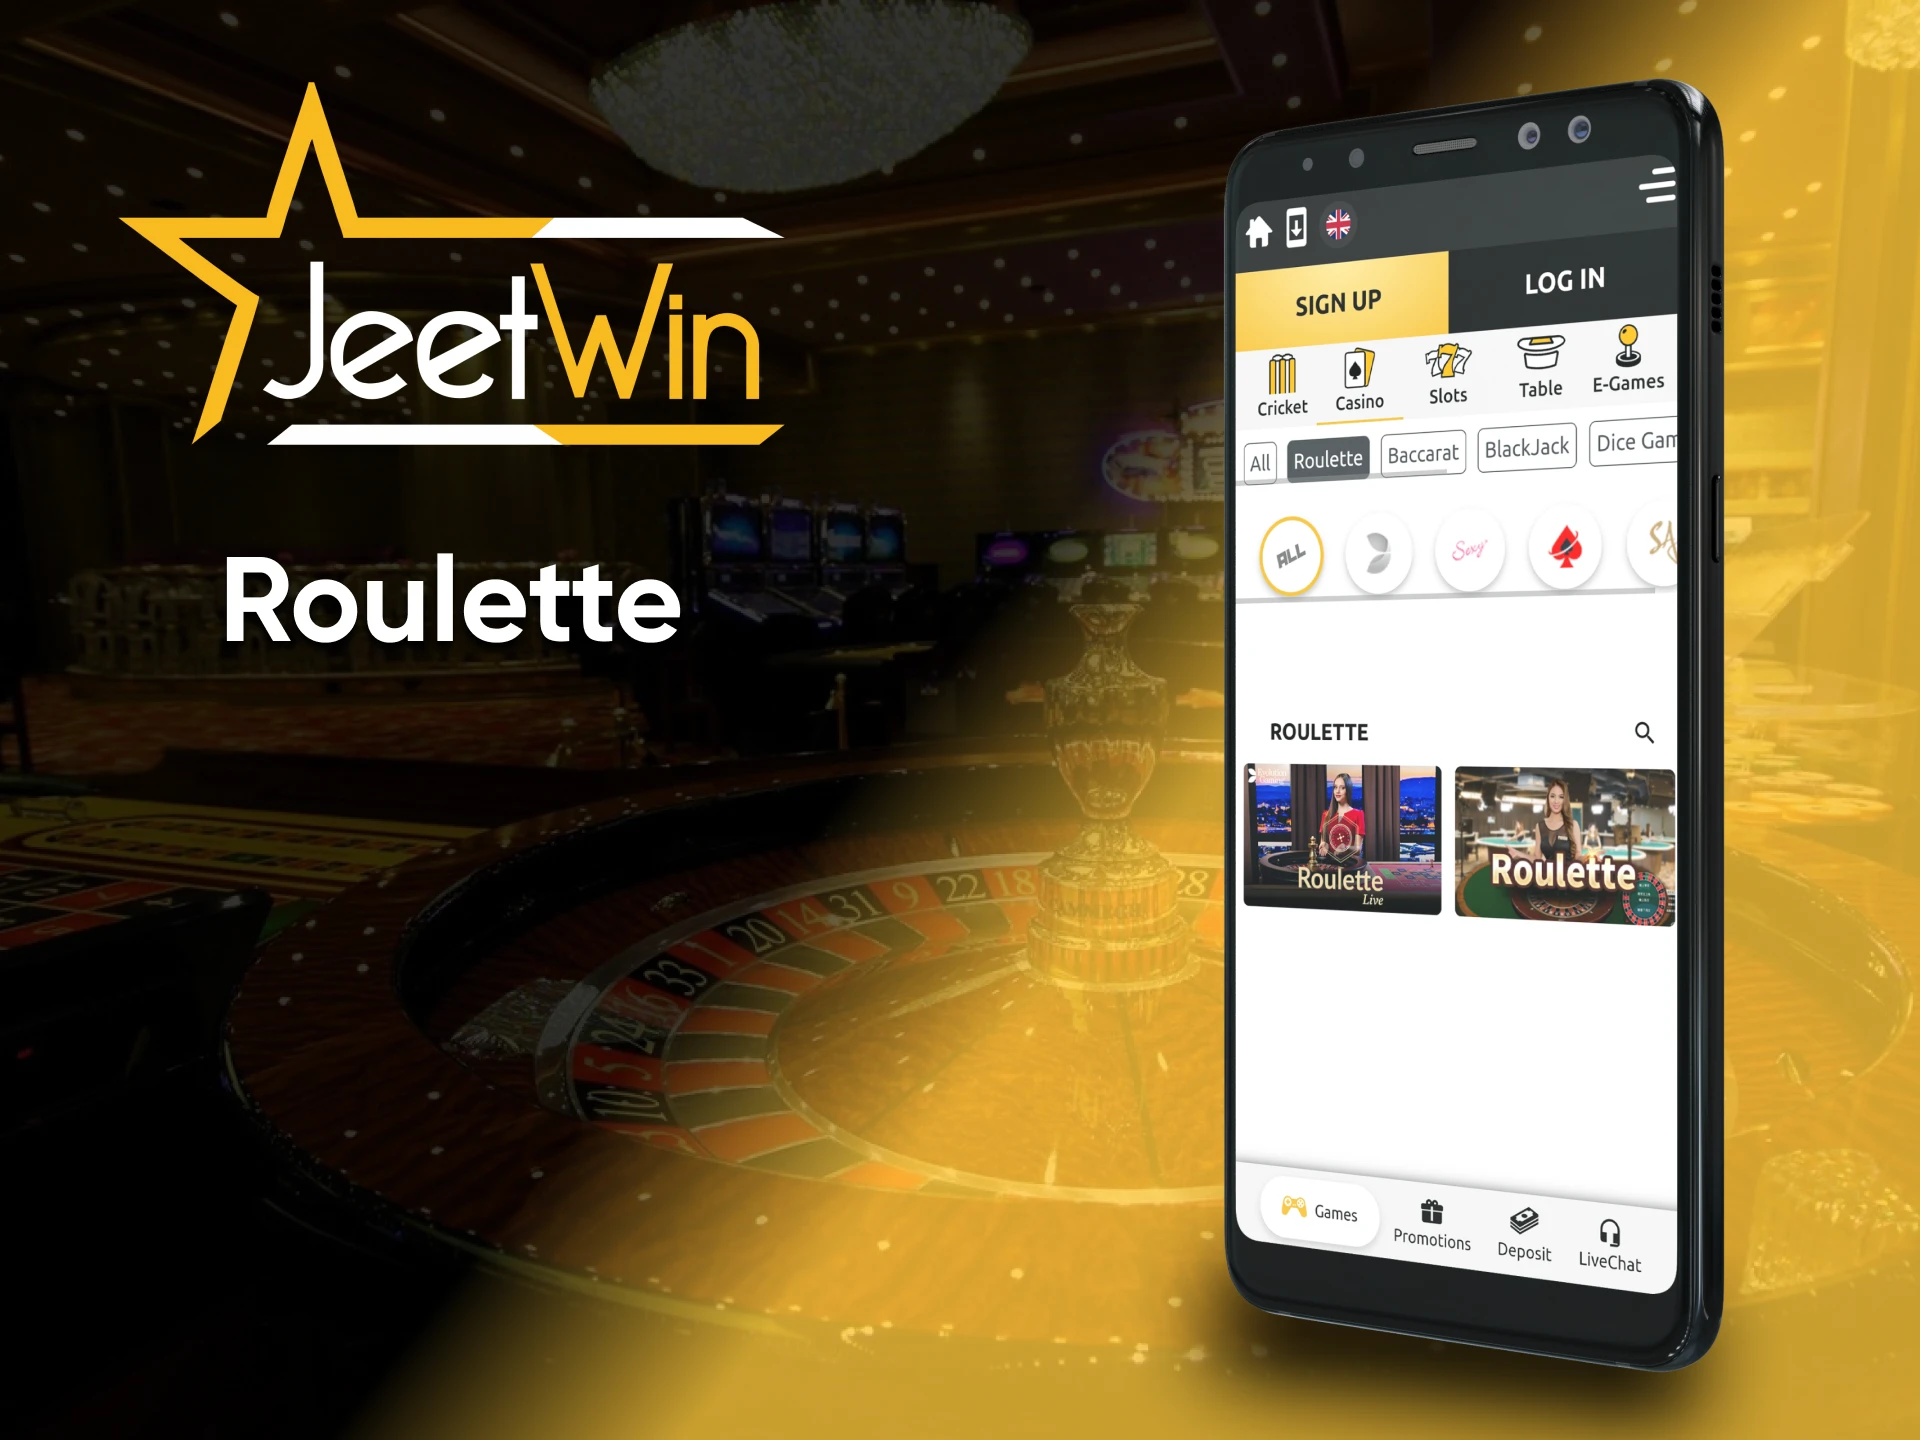 Roulette is a game that you can play on Jeetwin.